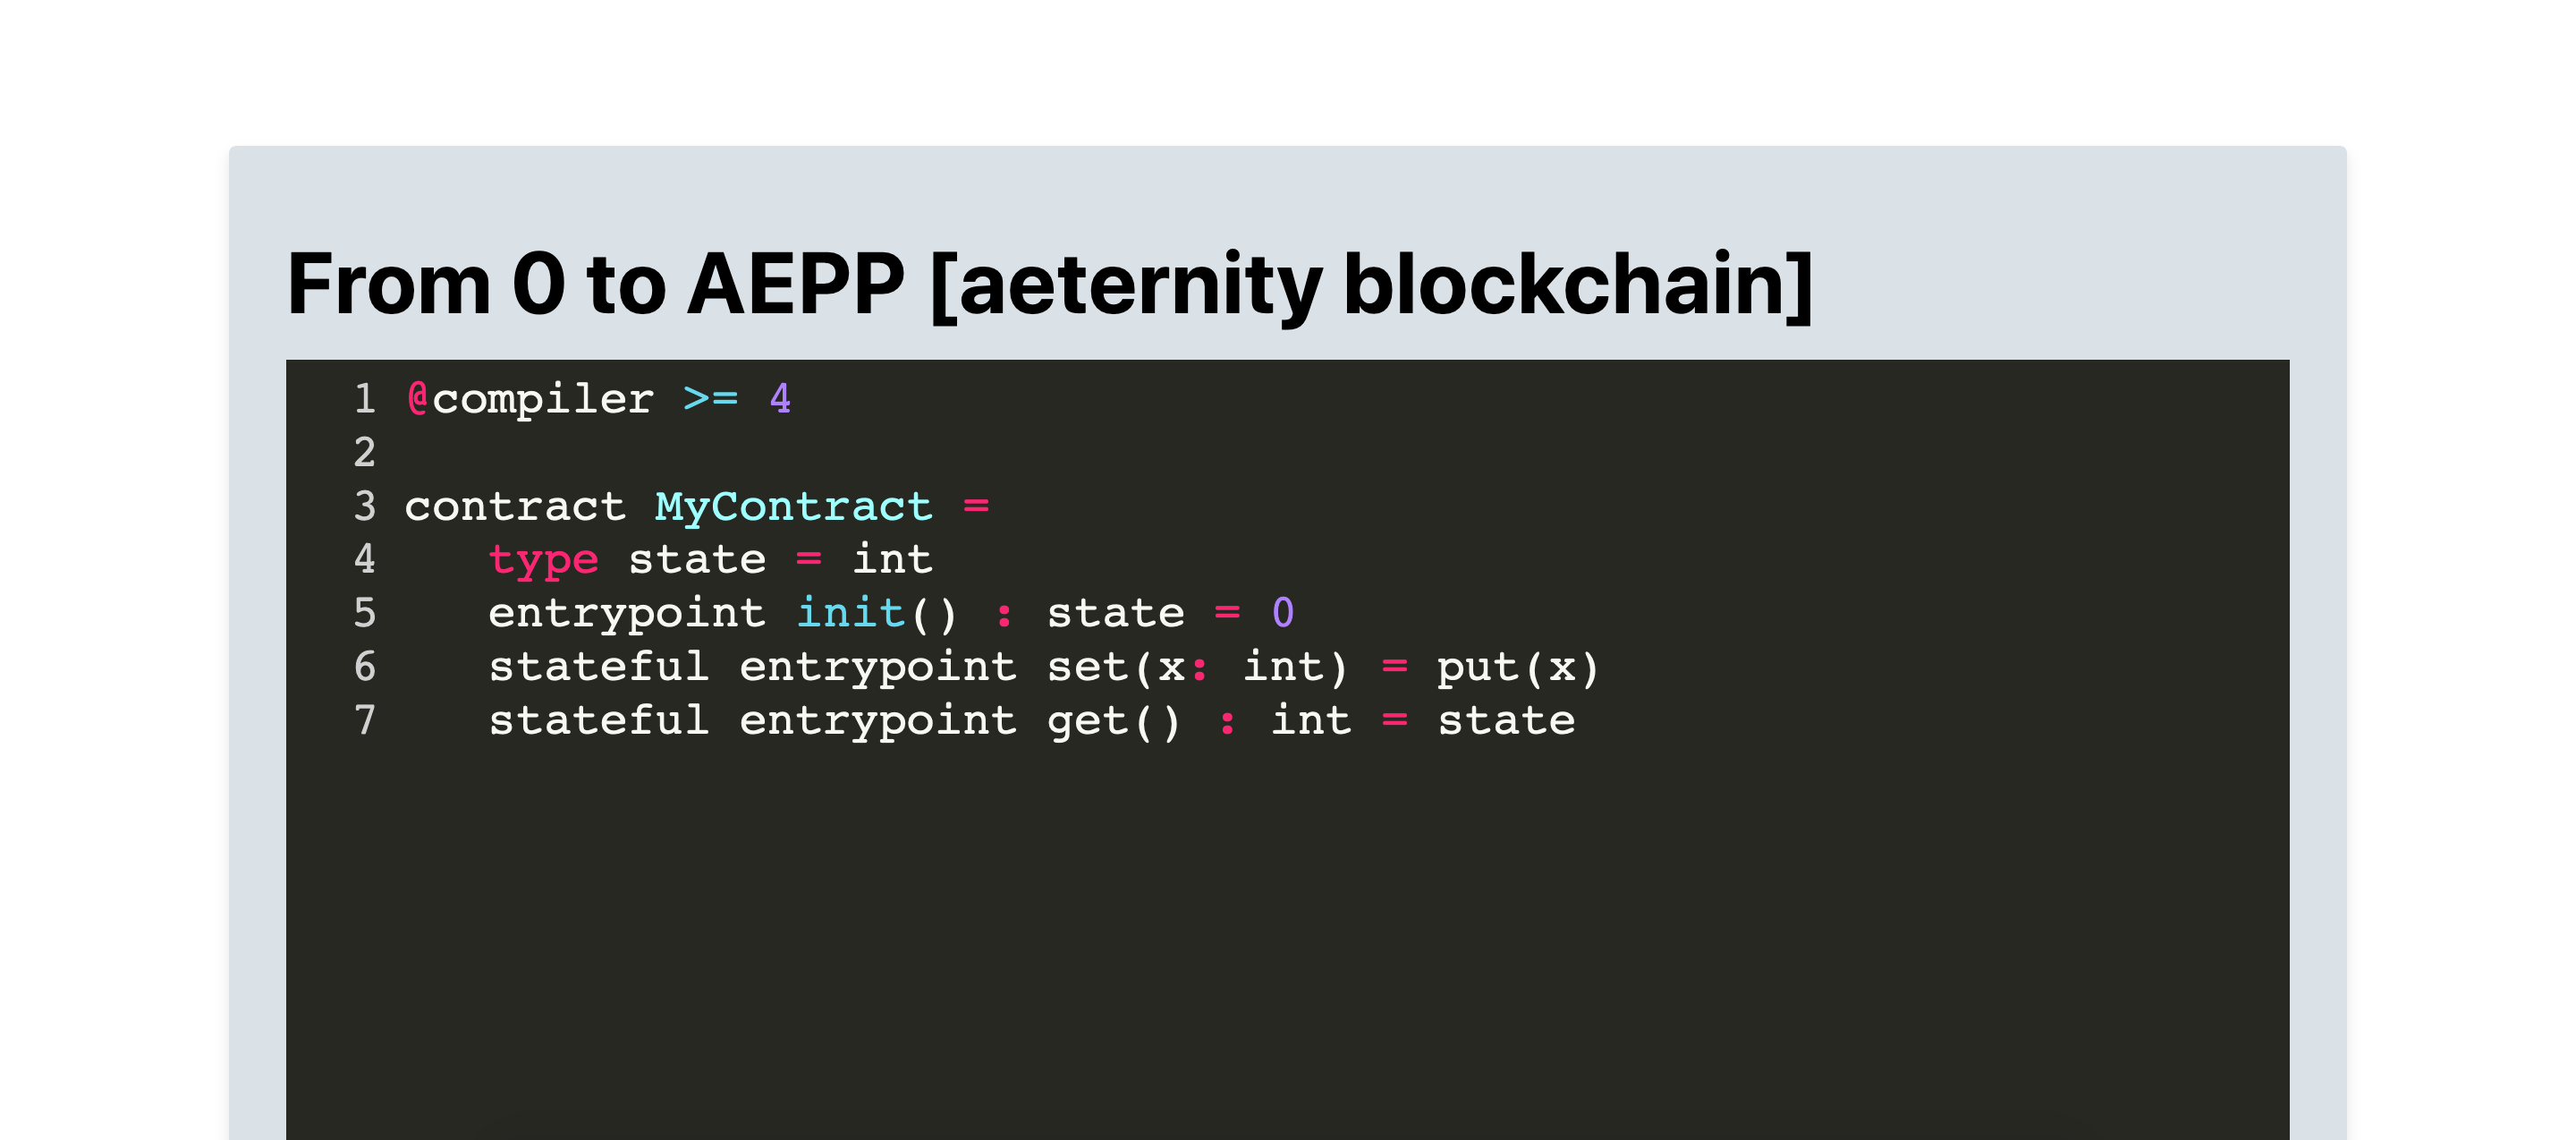 Cover Image for From zero to a fully-fledged aeternity decentralized application in less than 10 minutes